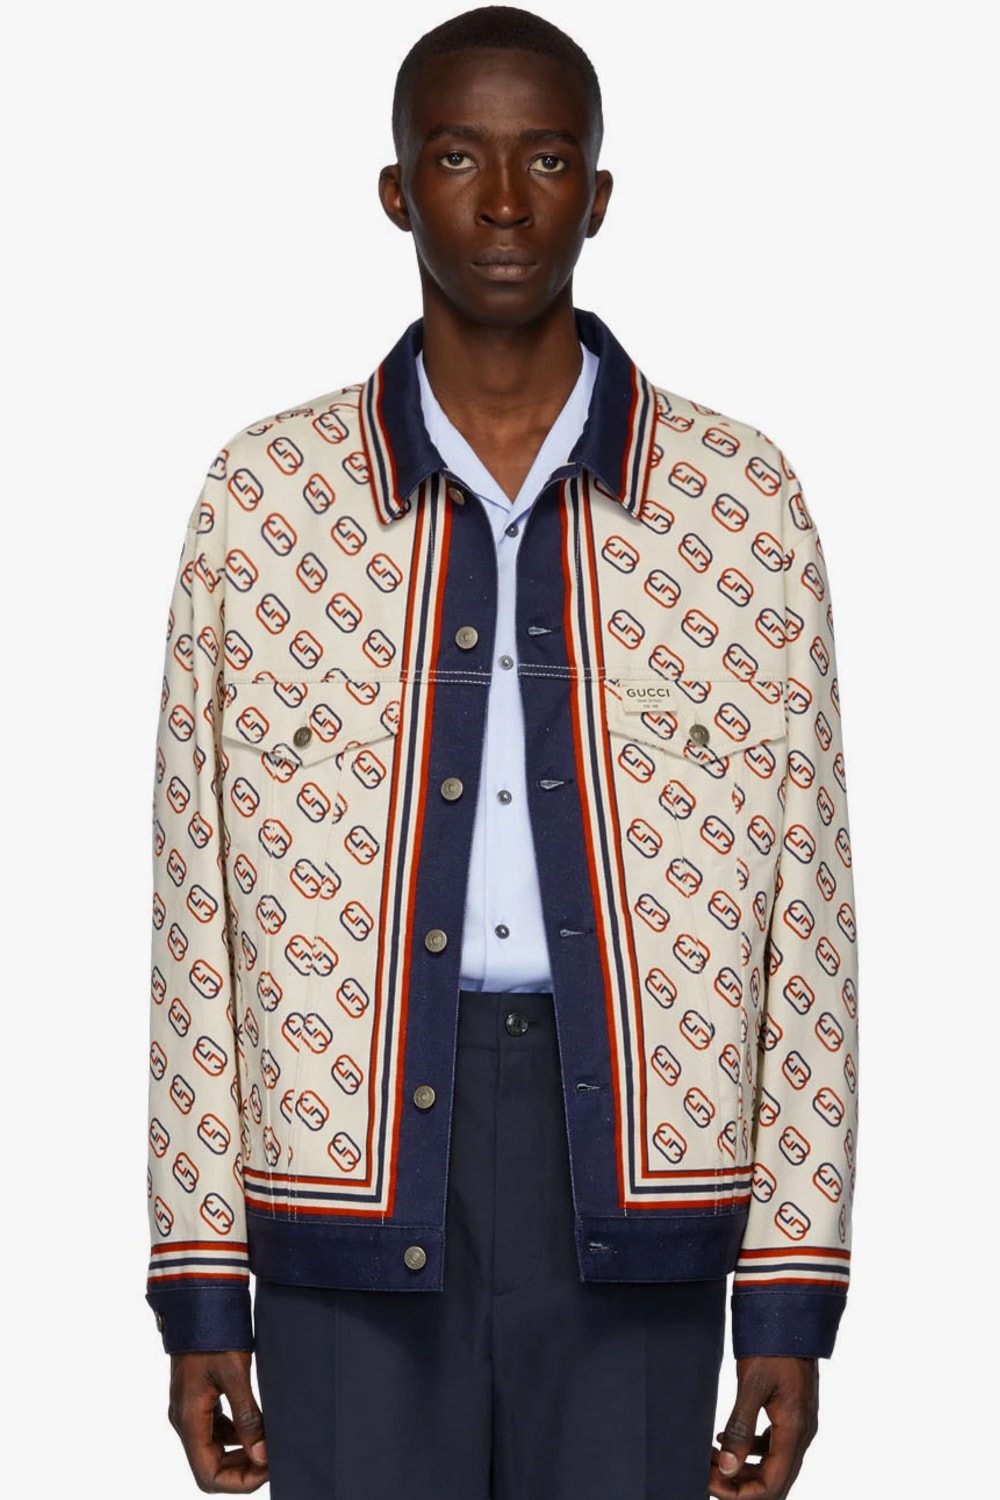 THE BEST Gucci Red Mix Green Luxury Brand Bomber Jacket Limited Edition